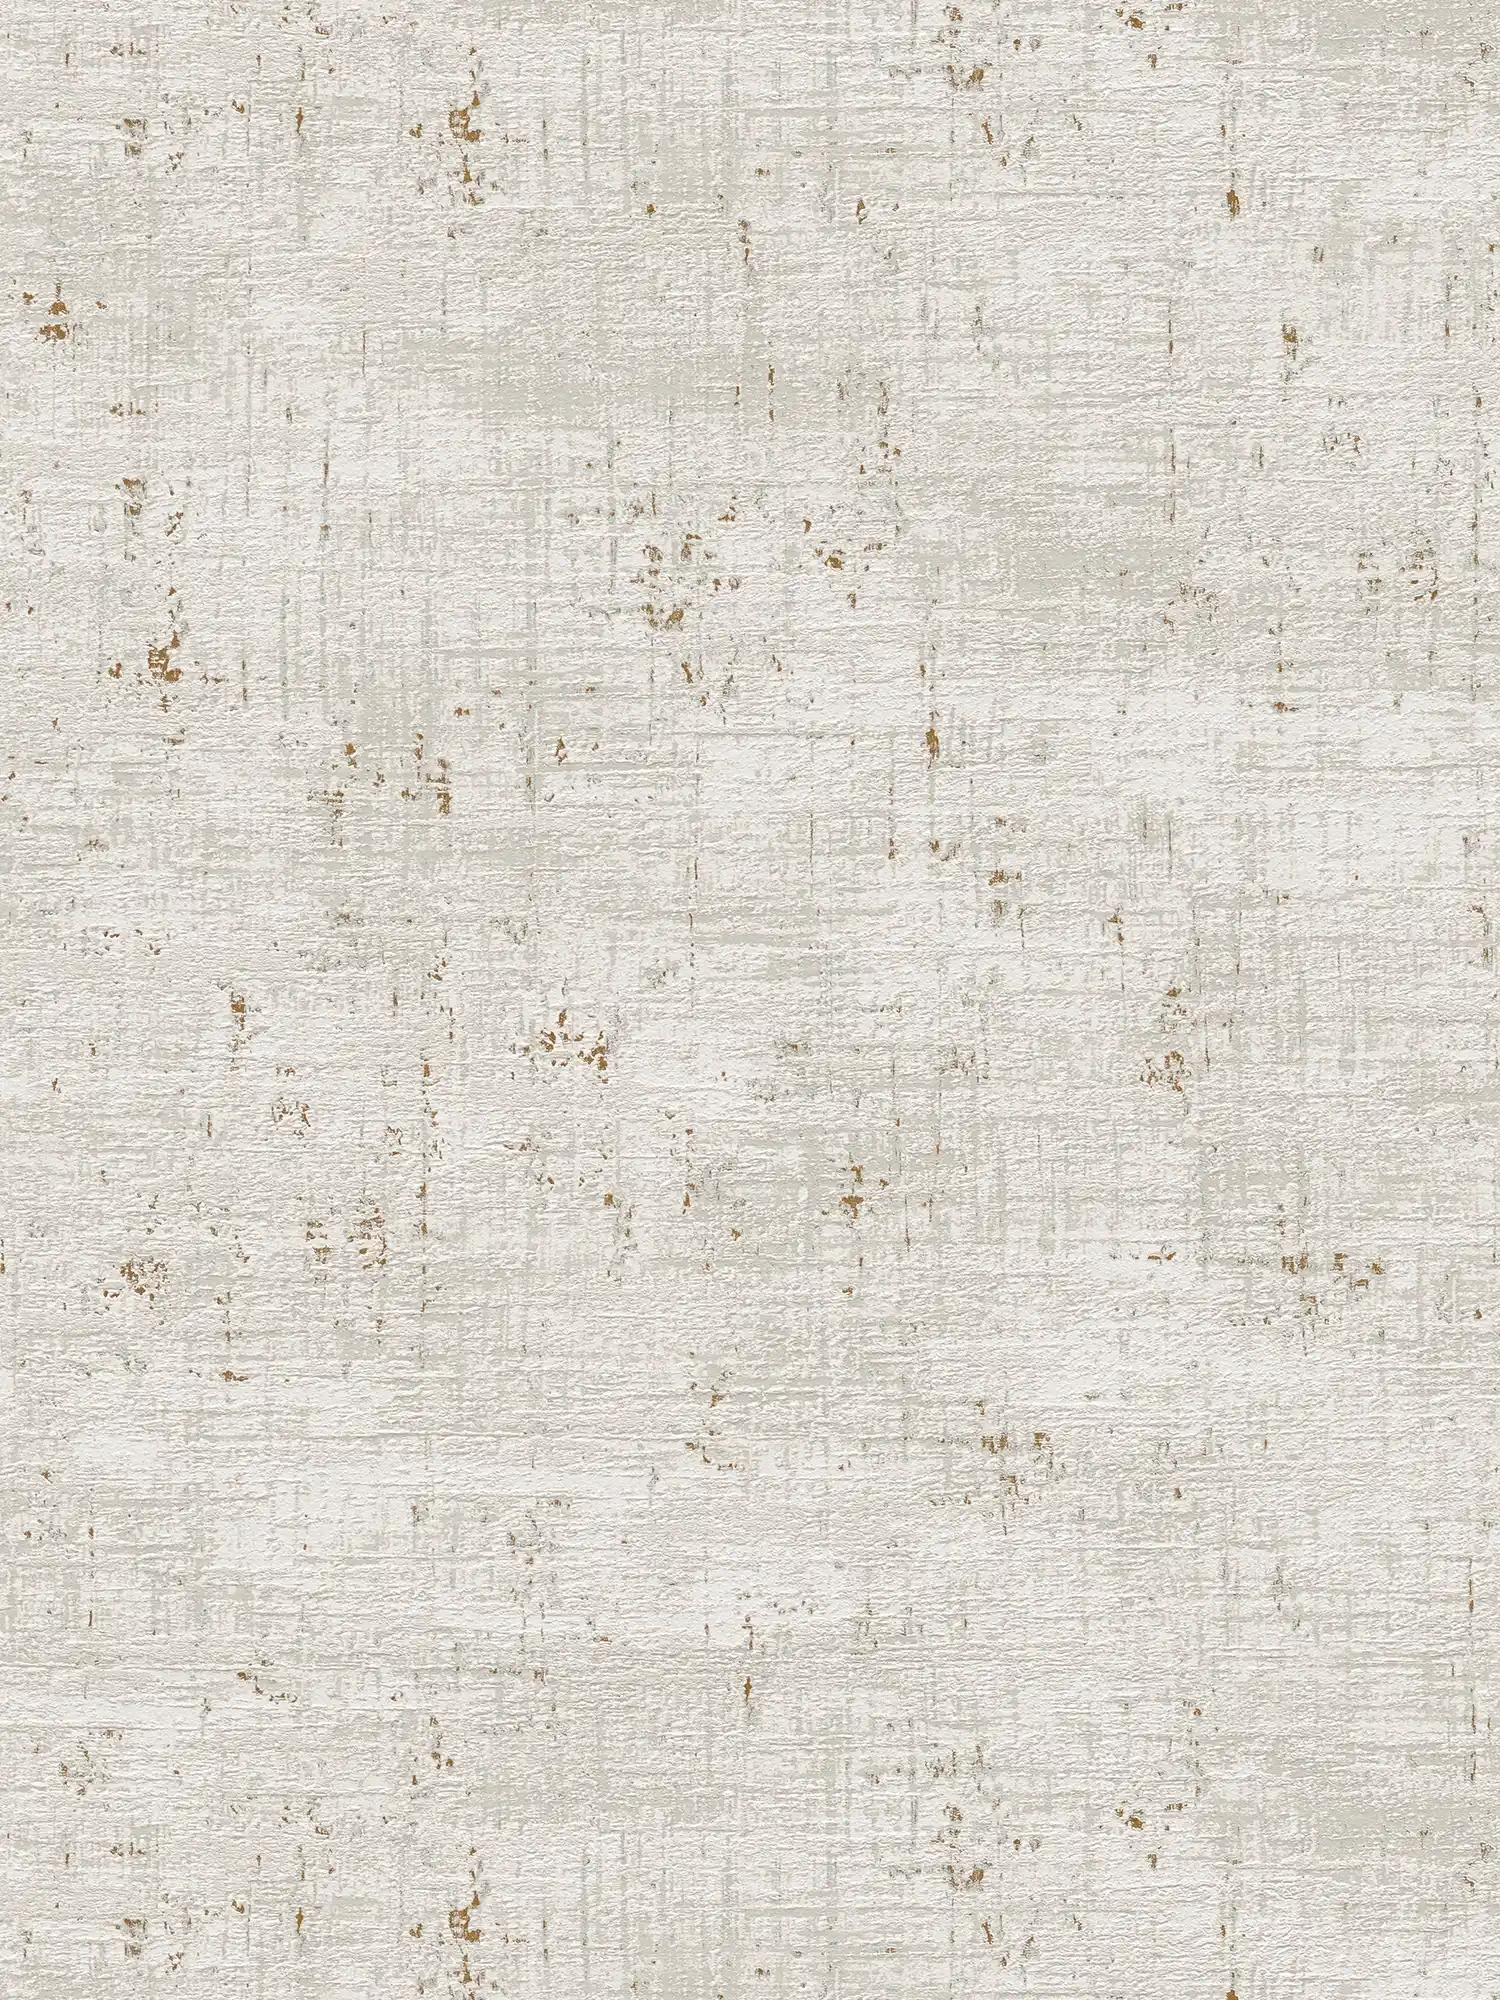 Non-woven wallpaper in used look with gold accents - grey , white, gold
